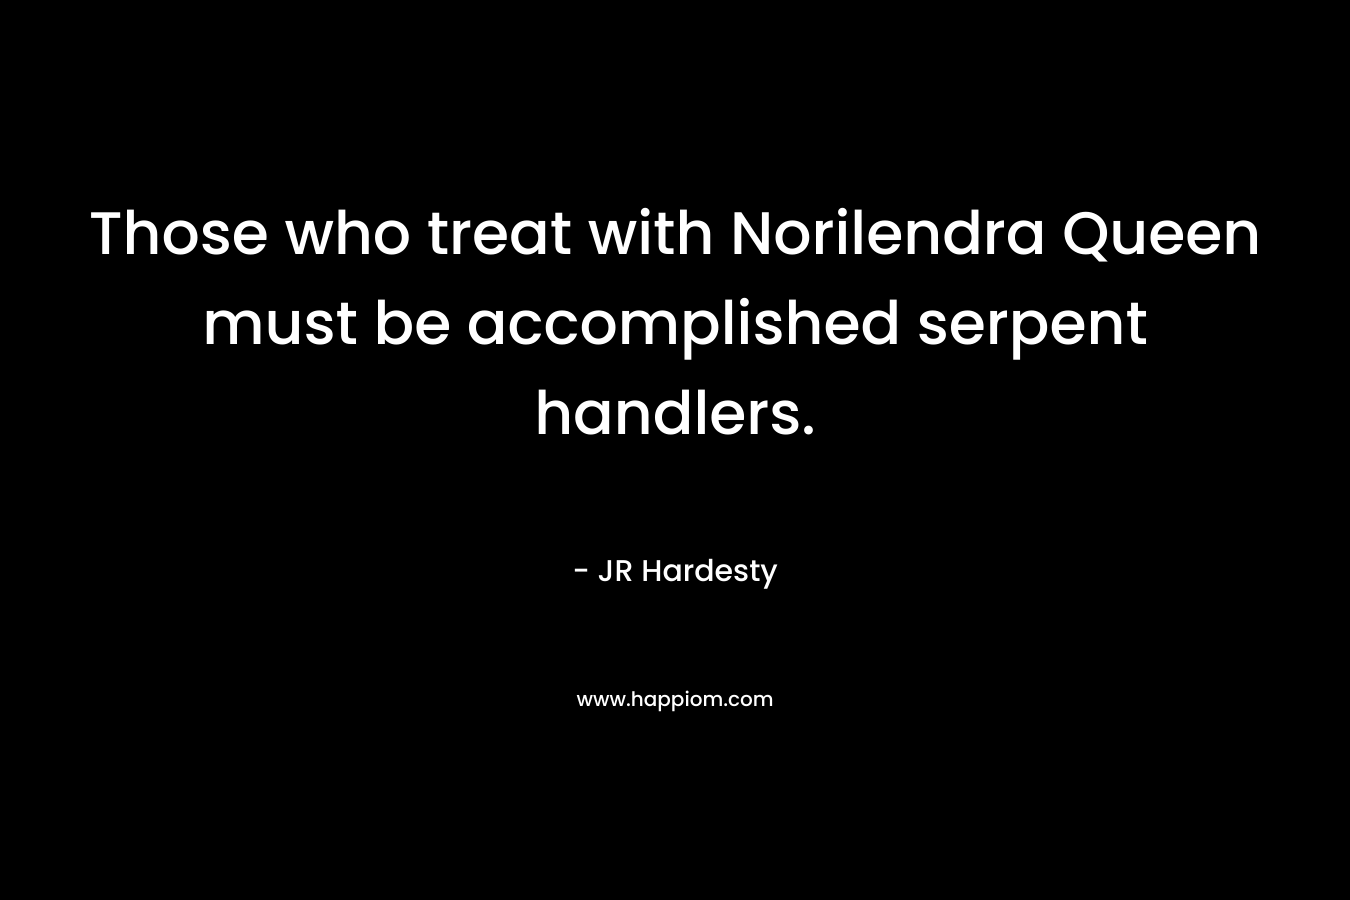 Those who treat with Norilendra Queen must be accomplished serpent handlers. – JR Hardesty